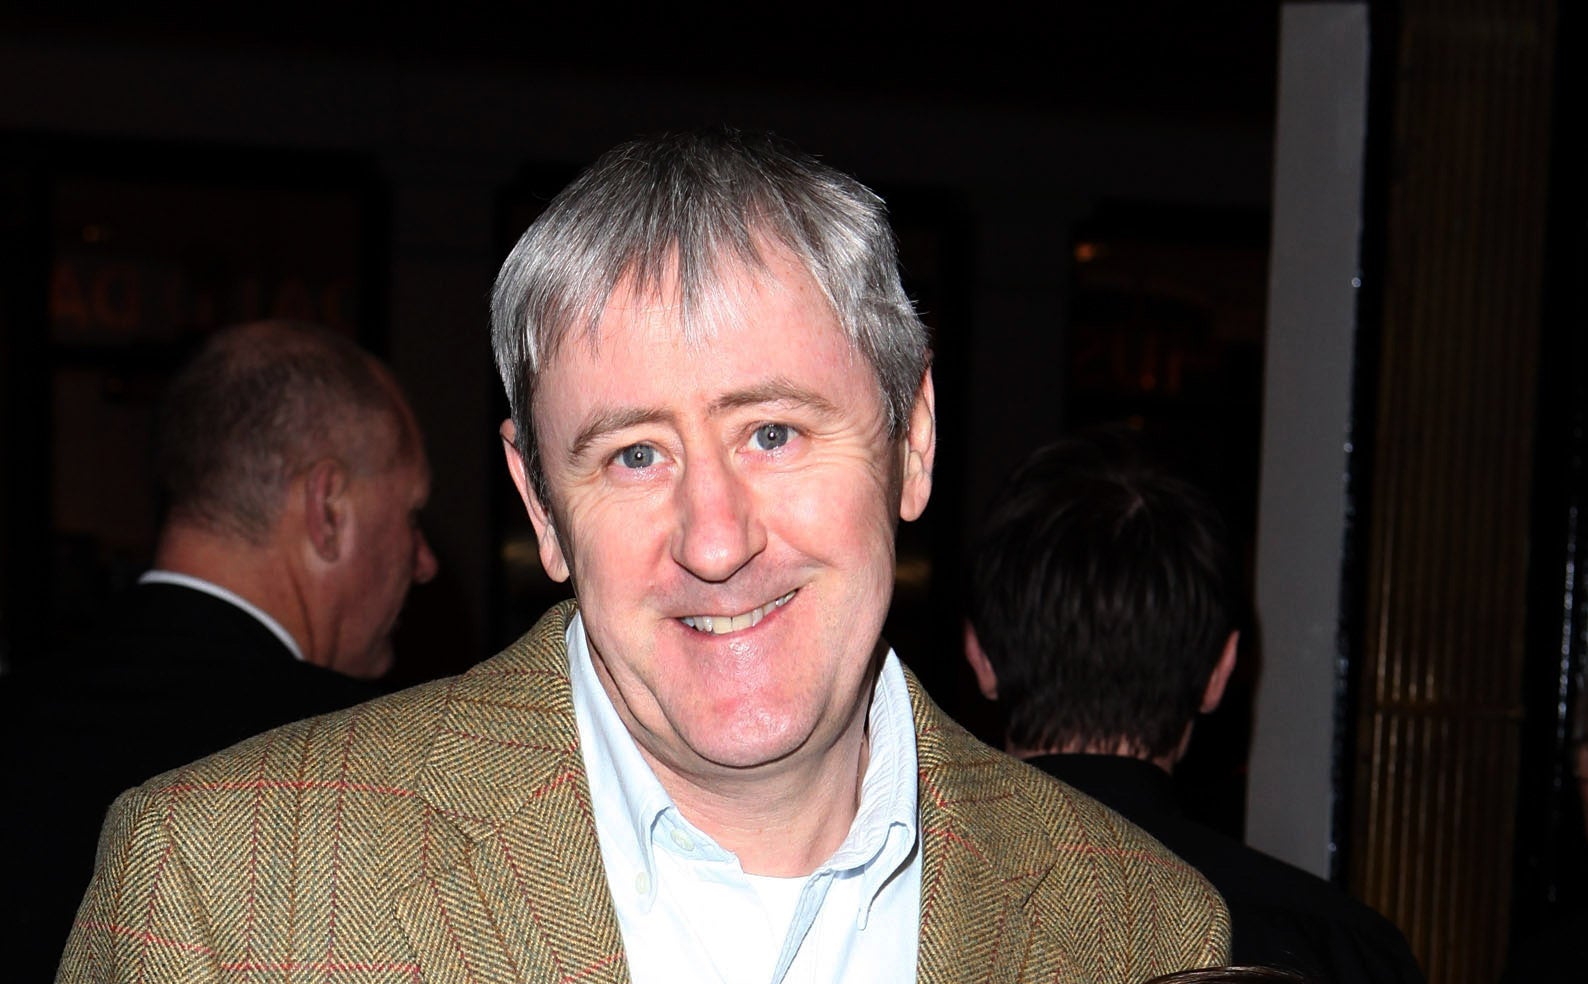 Nicholas Lyndhurst is joining the cast of BBC1's long-running detective drama New Tricks.